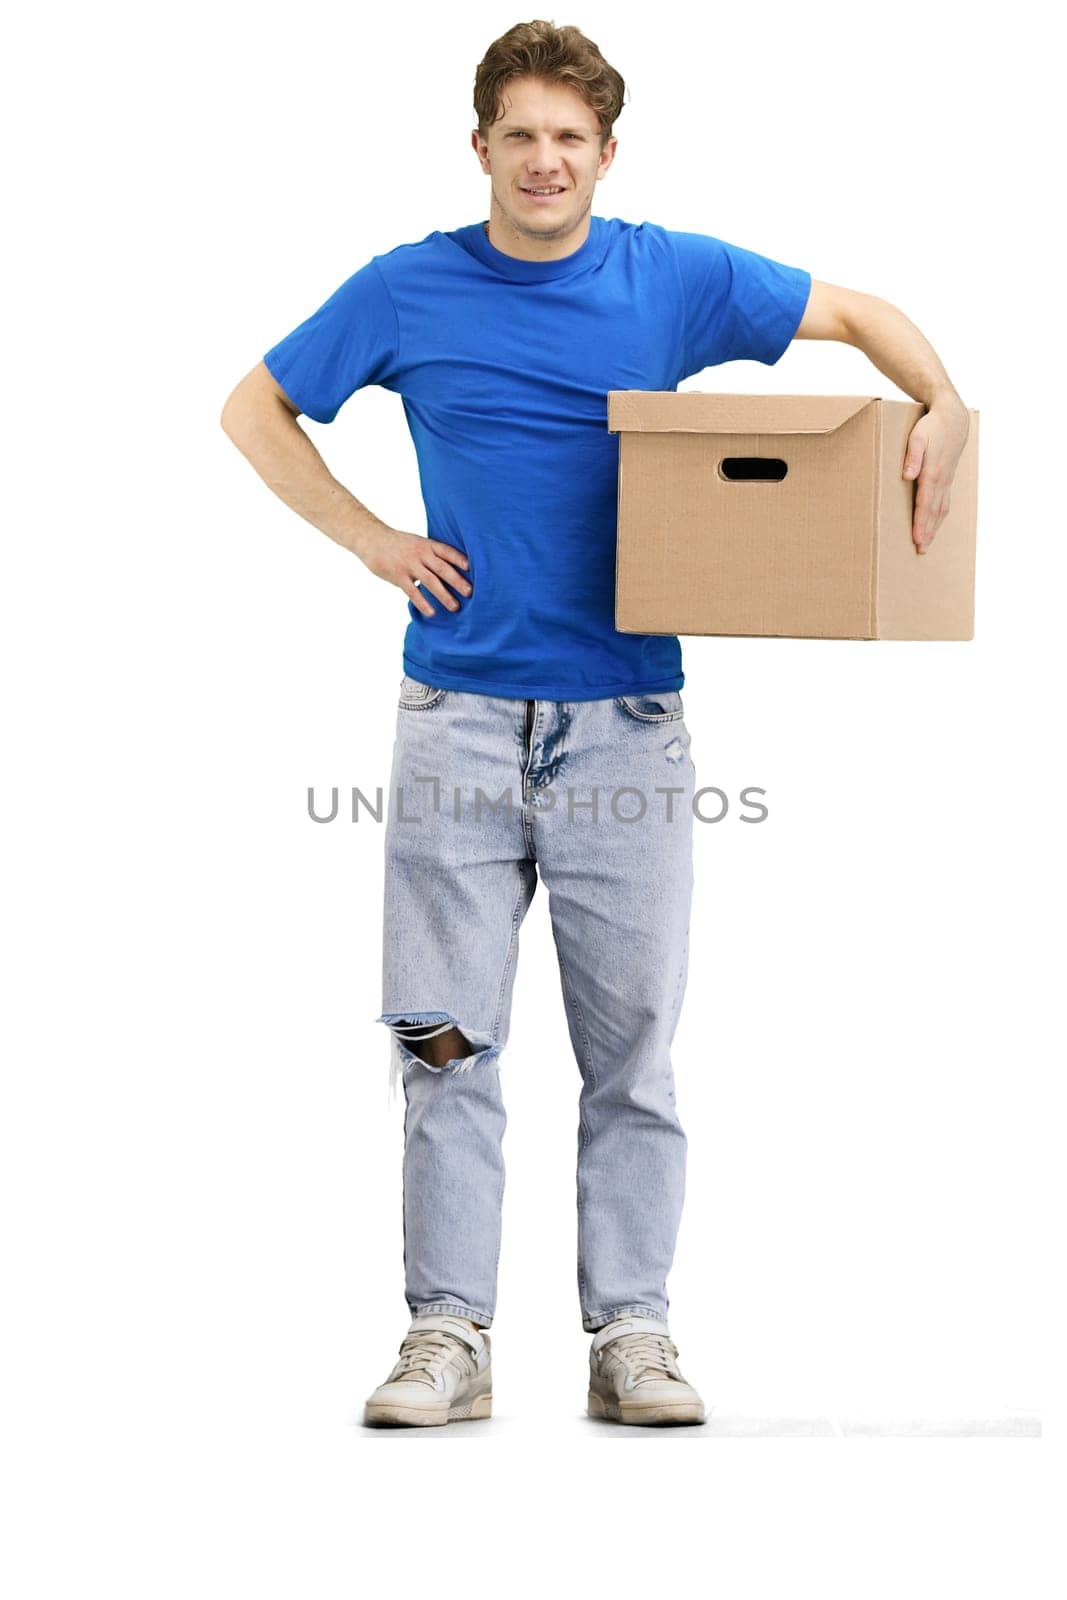 Delivery man, full-length, on a white background, with a box, hand on hip by Prosto